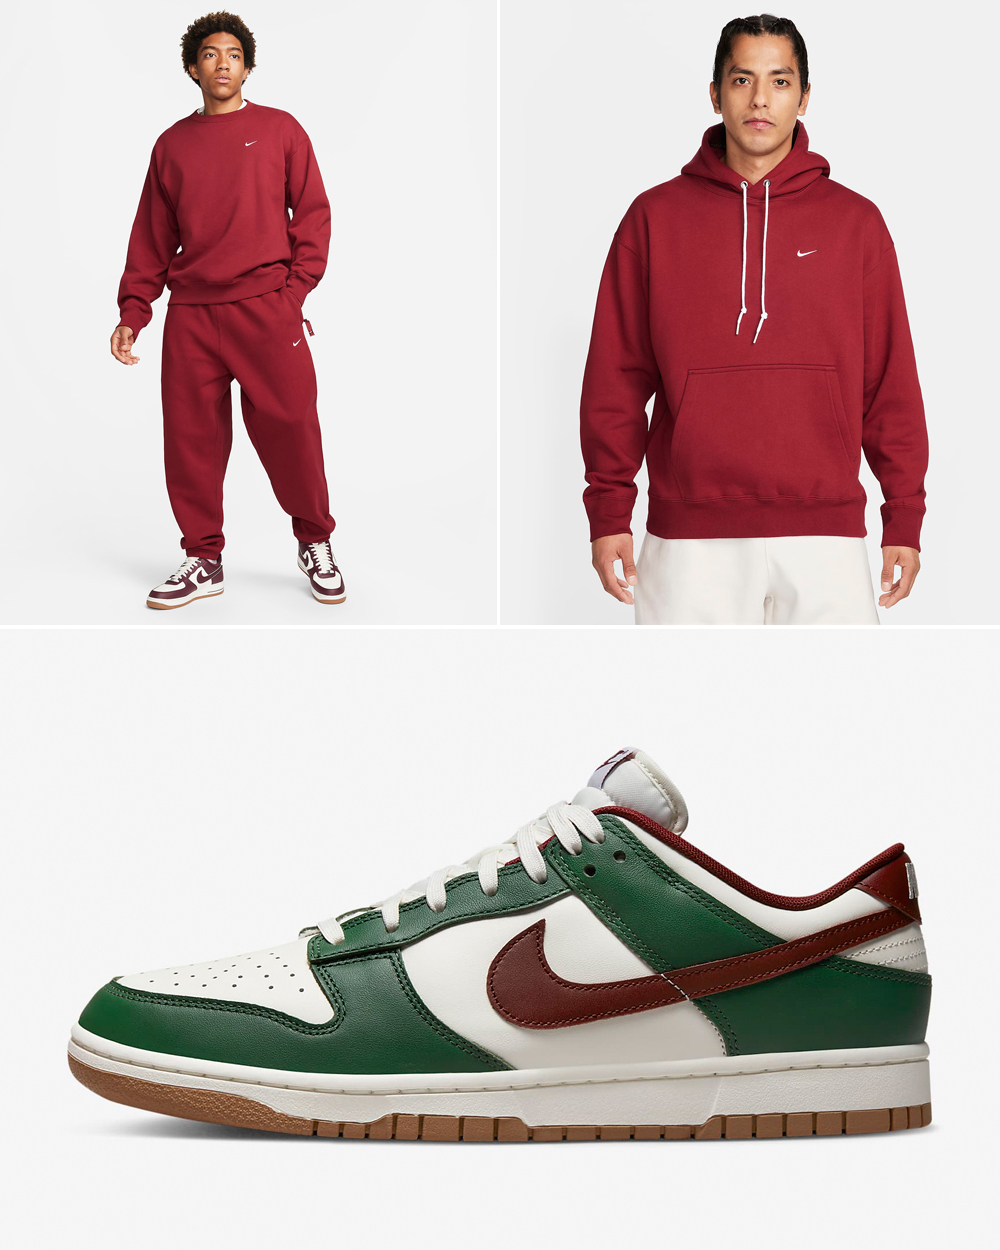 Nike Dunk Low Gorge Green Team Red Clothing Match